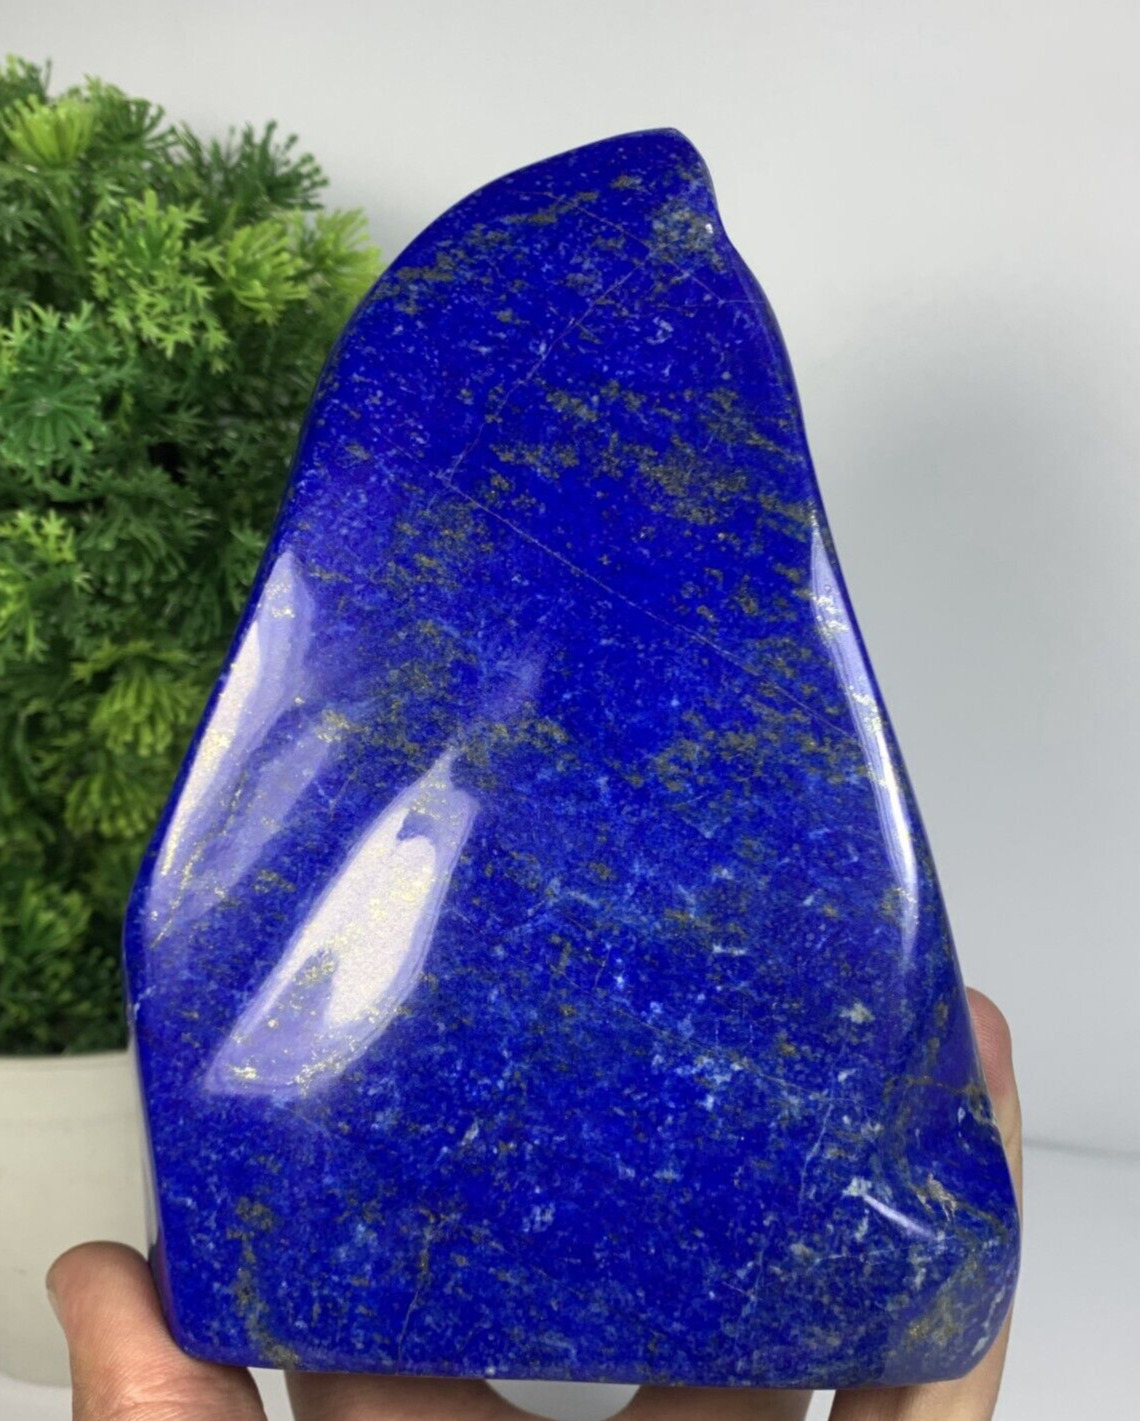 1255Gram Lapis Lazuli Freeform Grade AA+ Tumbled Rough Polished From Afghanistan